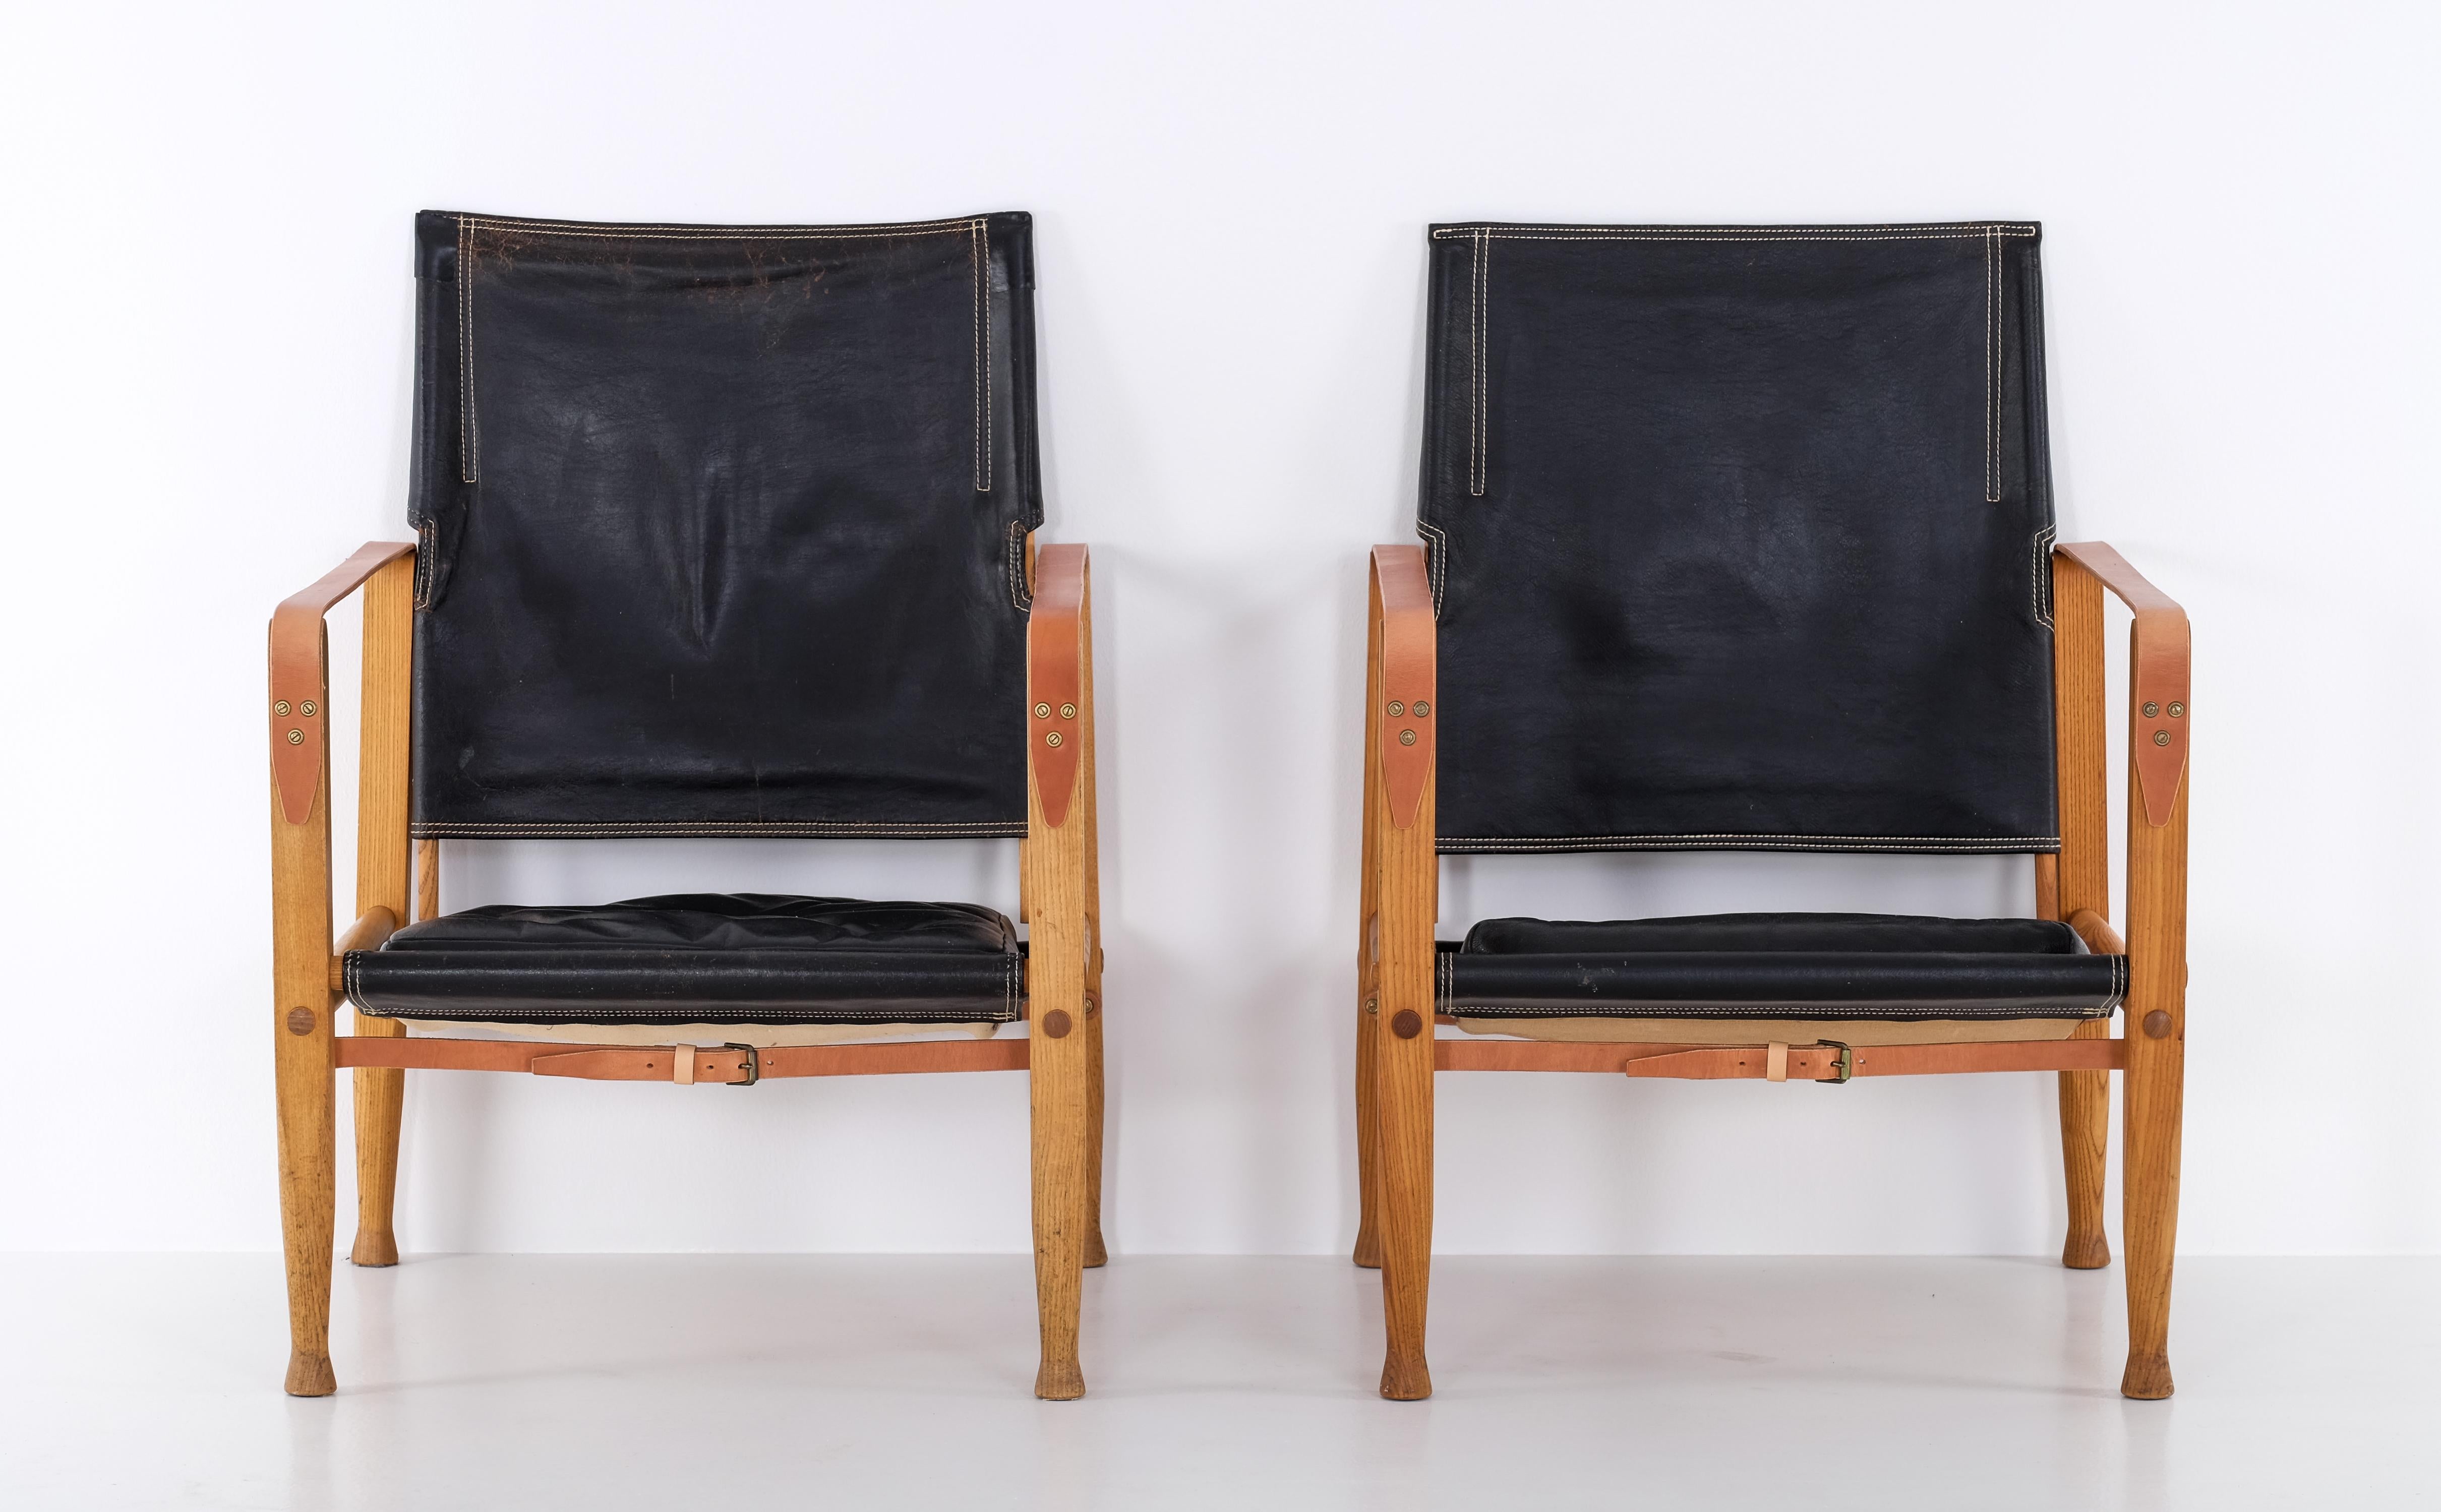 Pair of Kaare Klint Black Leather Safari Chairs, 1960s For Sale 4